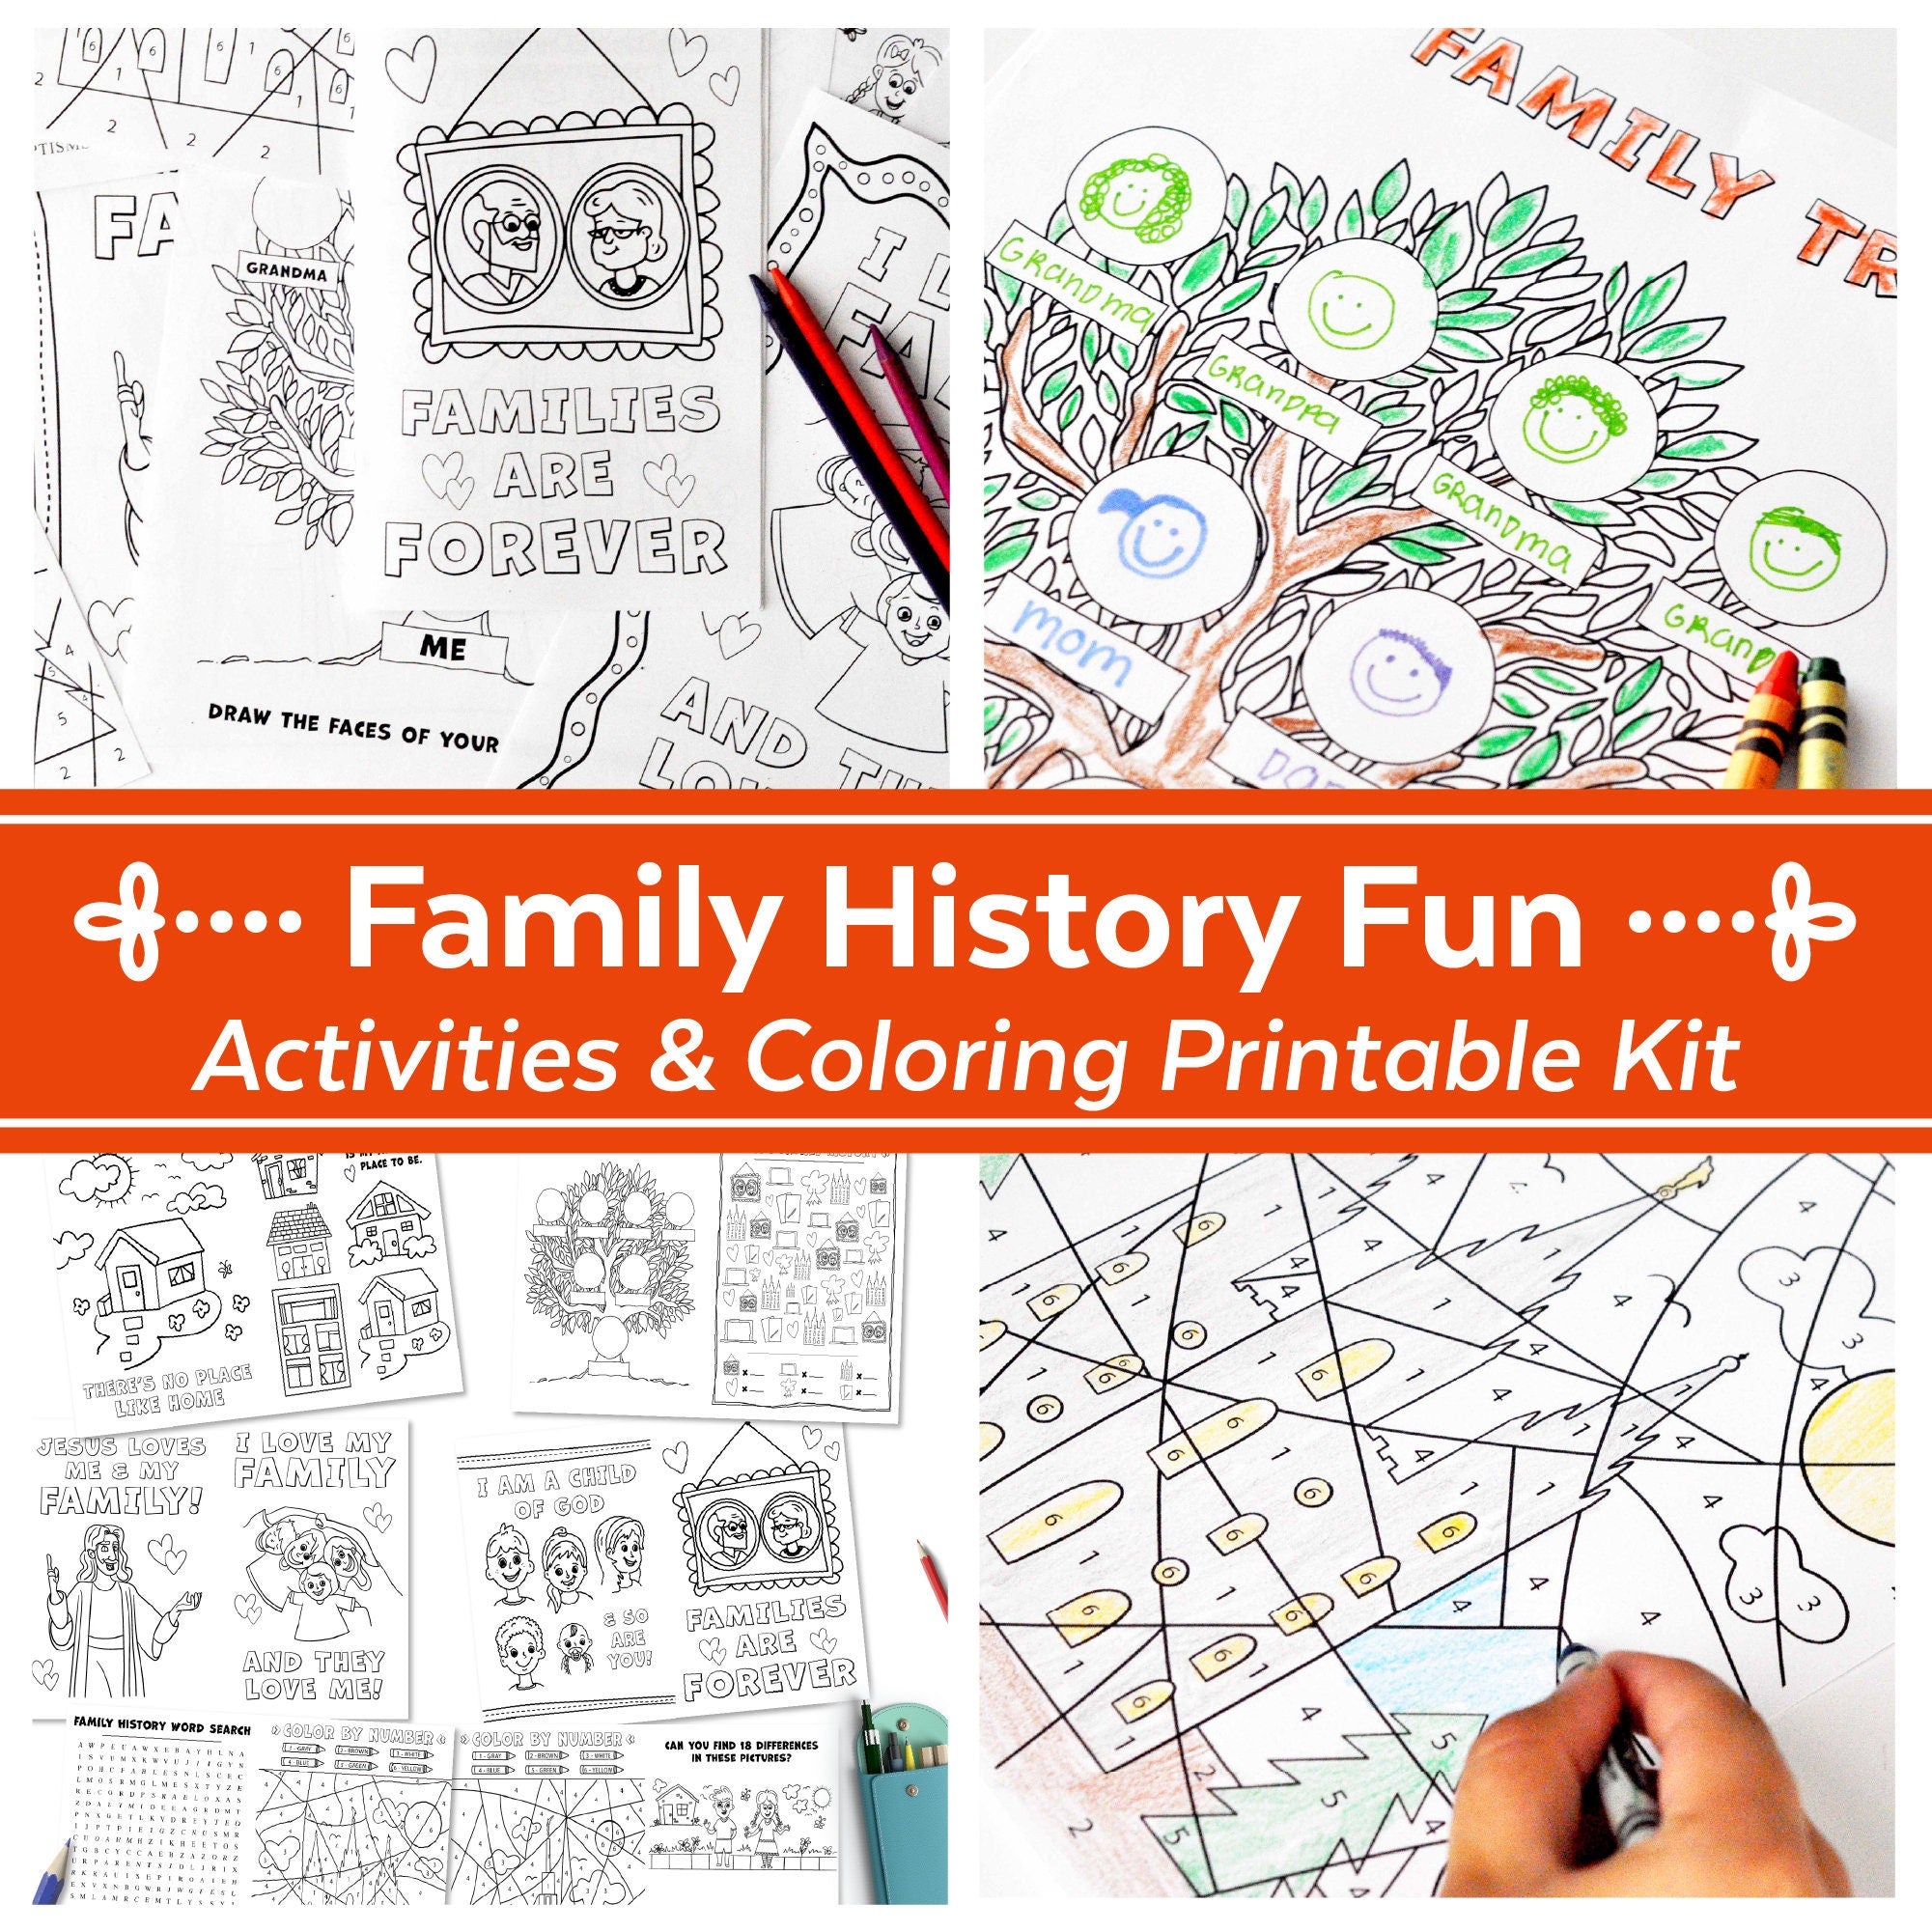 Family history fun activity coloring printable kit for kids â ministering printables